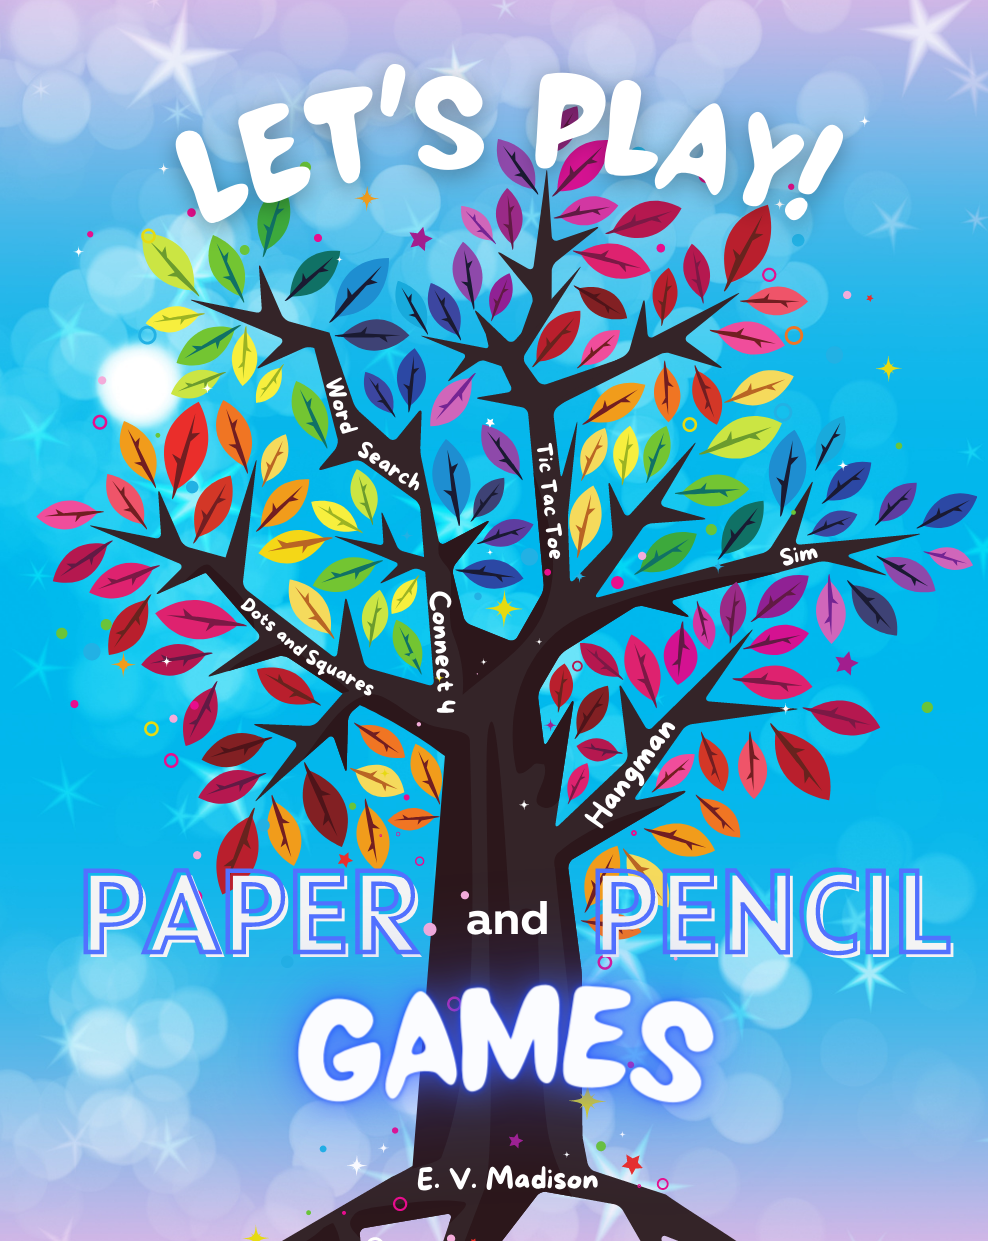 Let's Play! Paper and Pencil Games